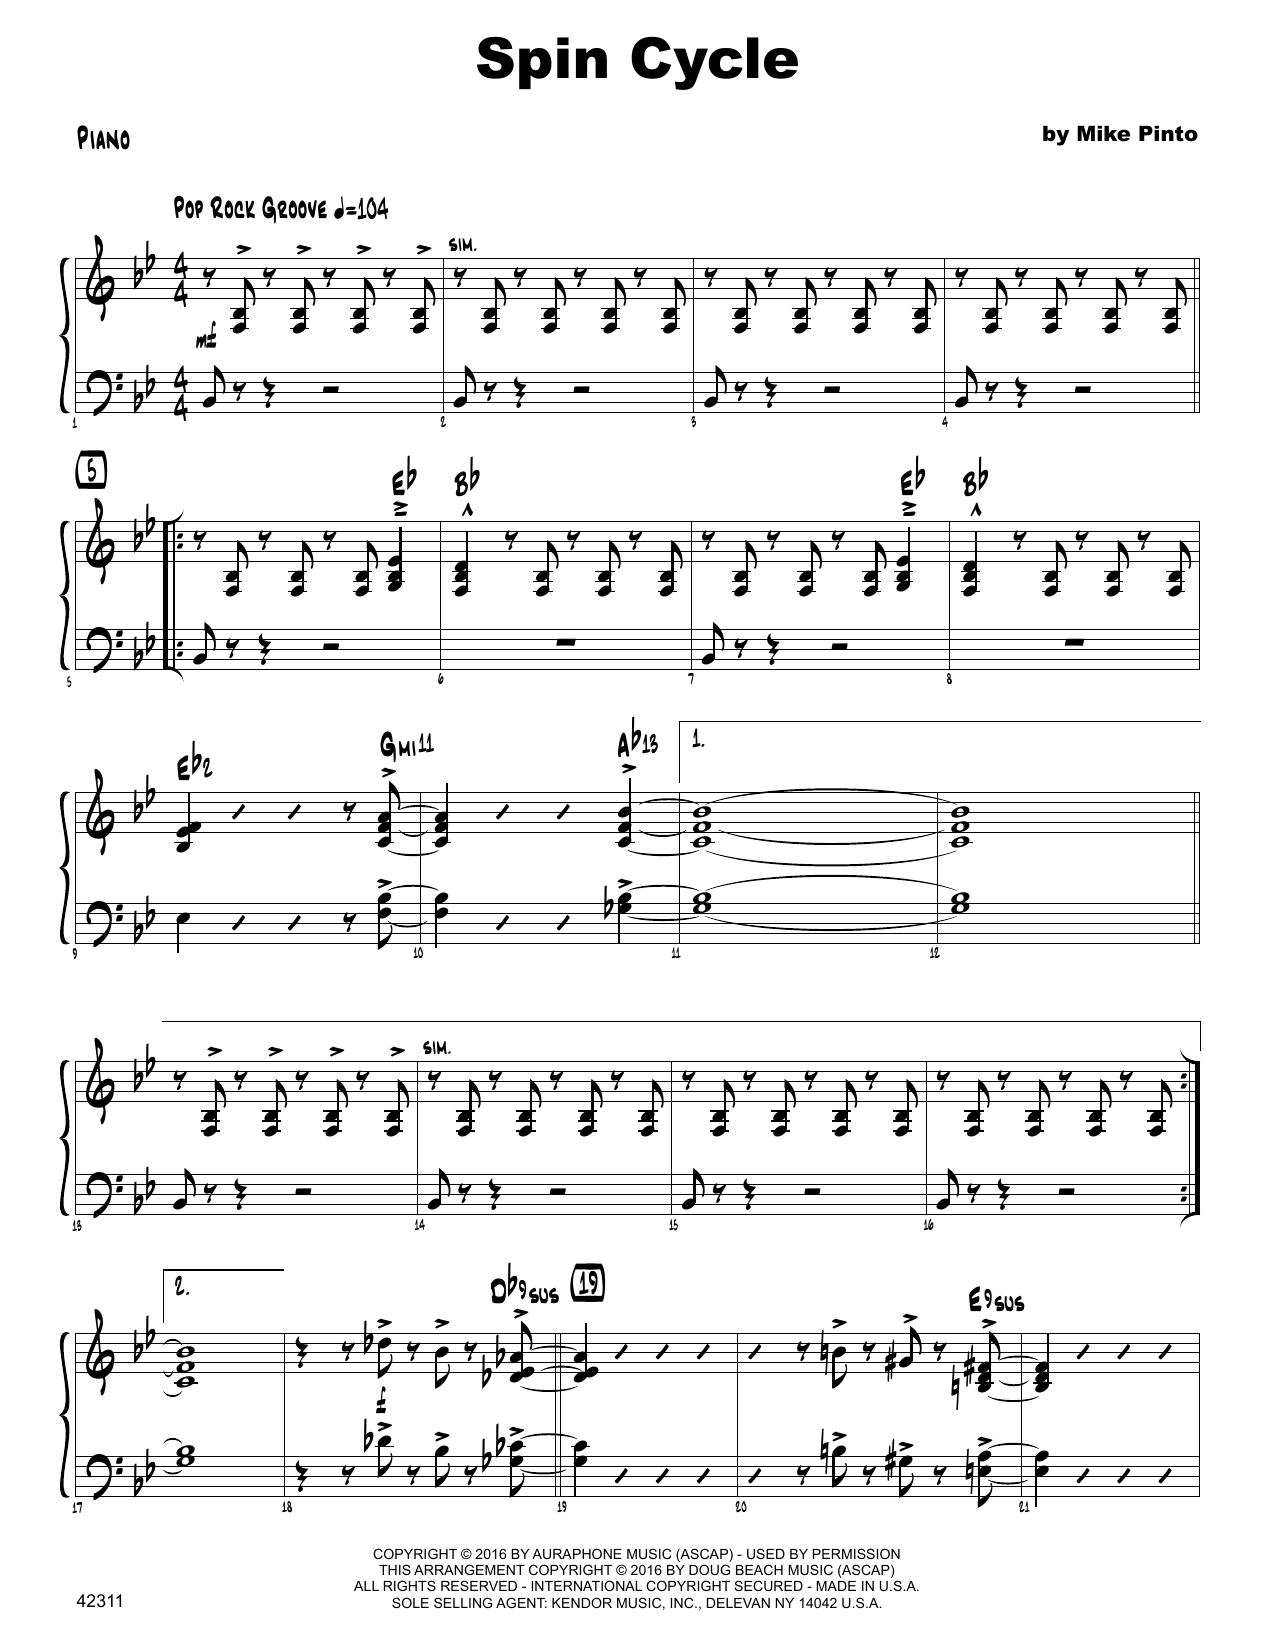 Download Mike Pinto Spin Cycle - Piano Sheet Music